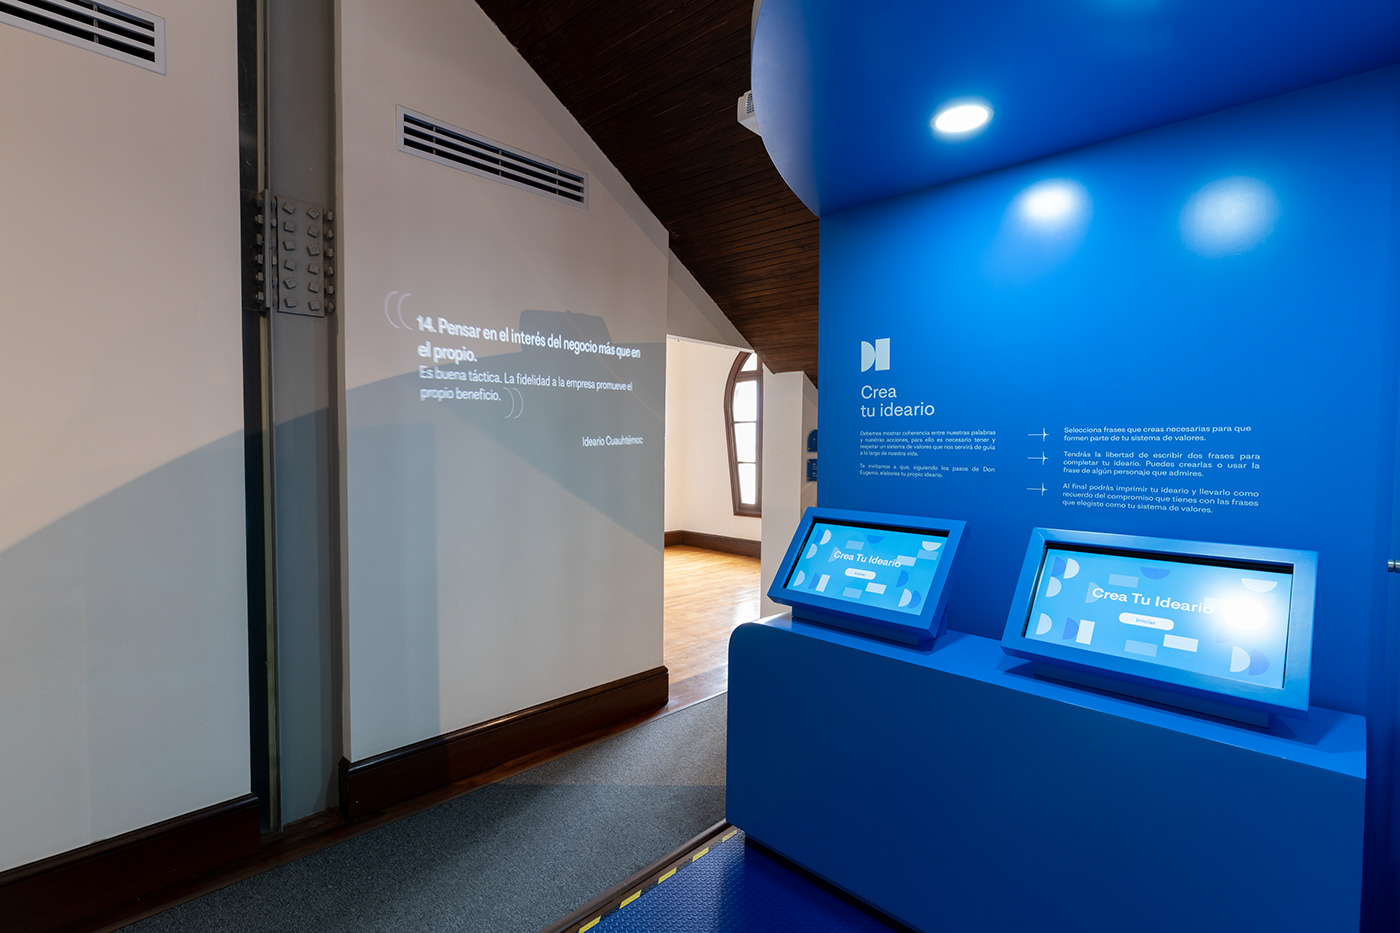 Exhibition  house interactive mid century museum projection mapping sculpture UI ux wall